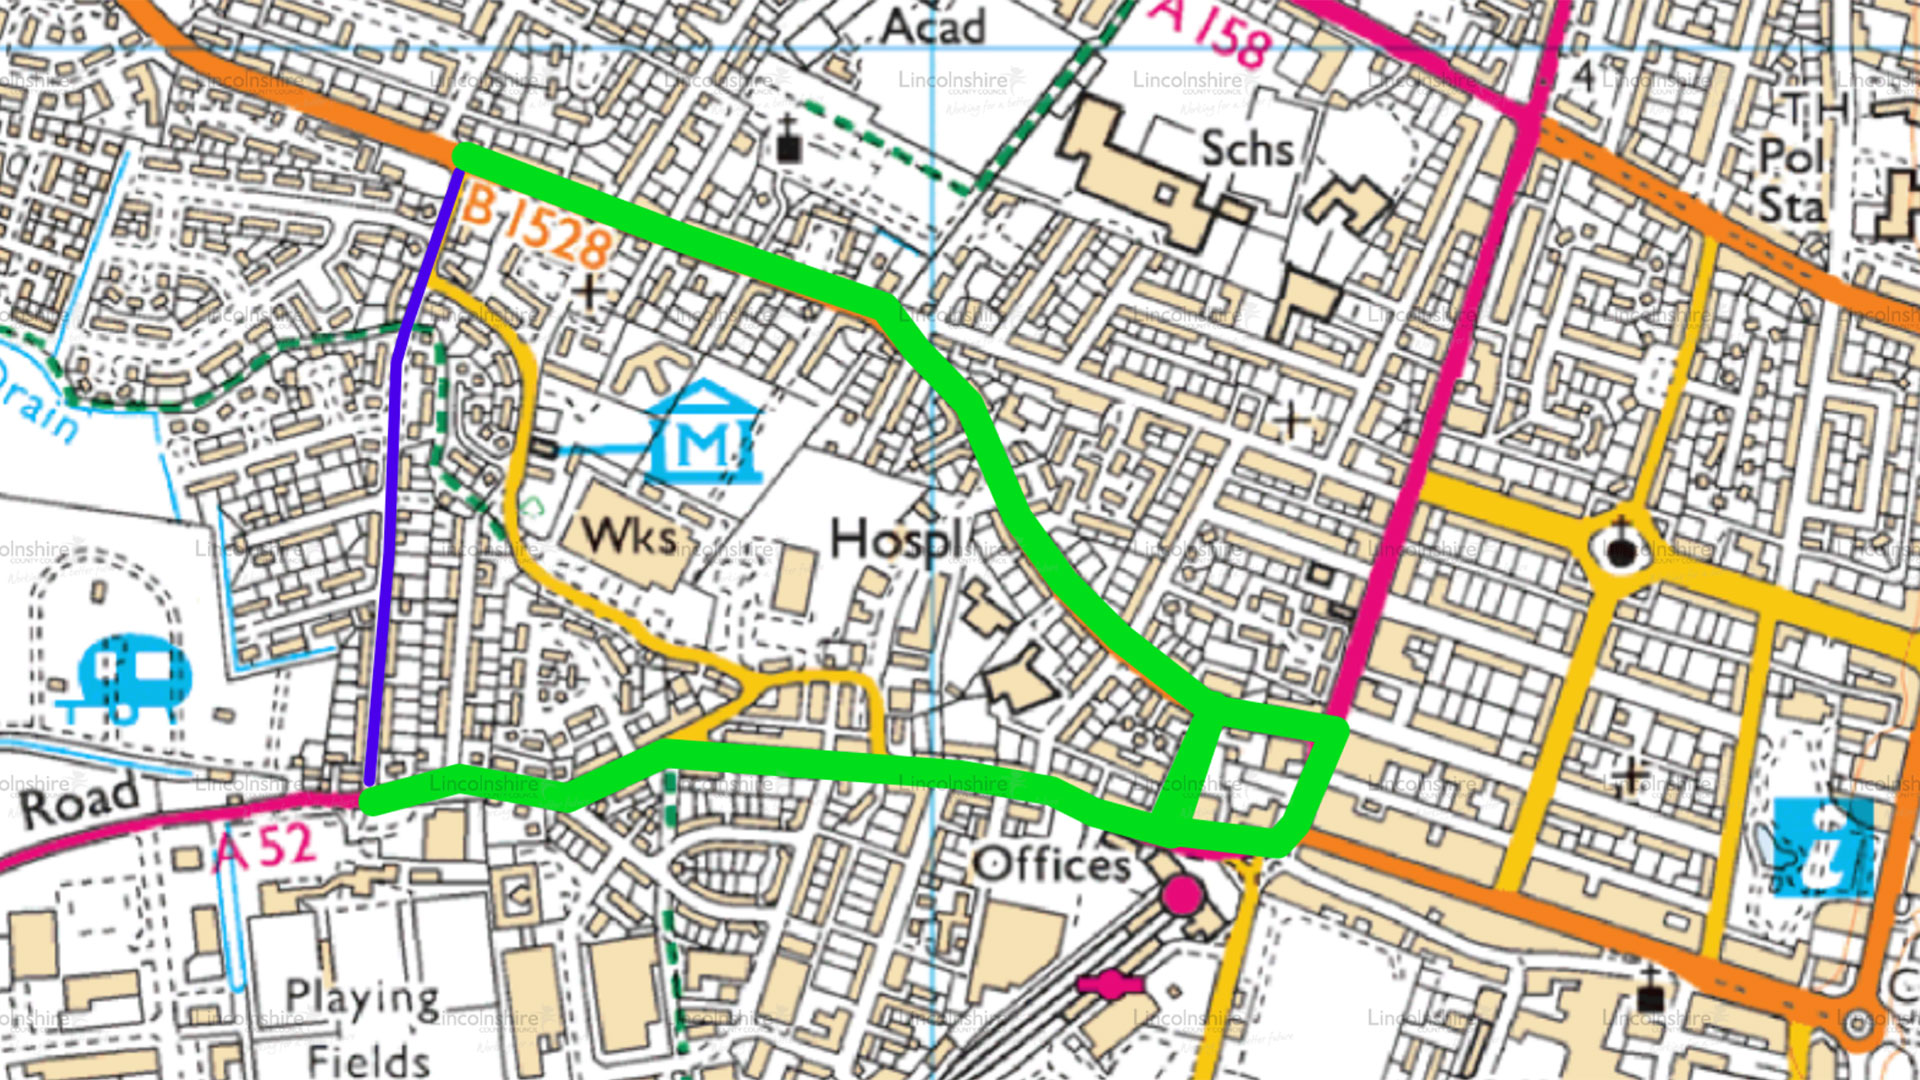 Queens Road Skegness working and diversion route